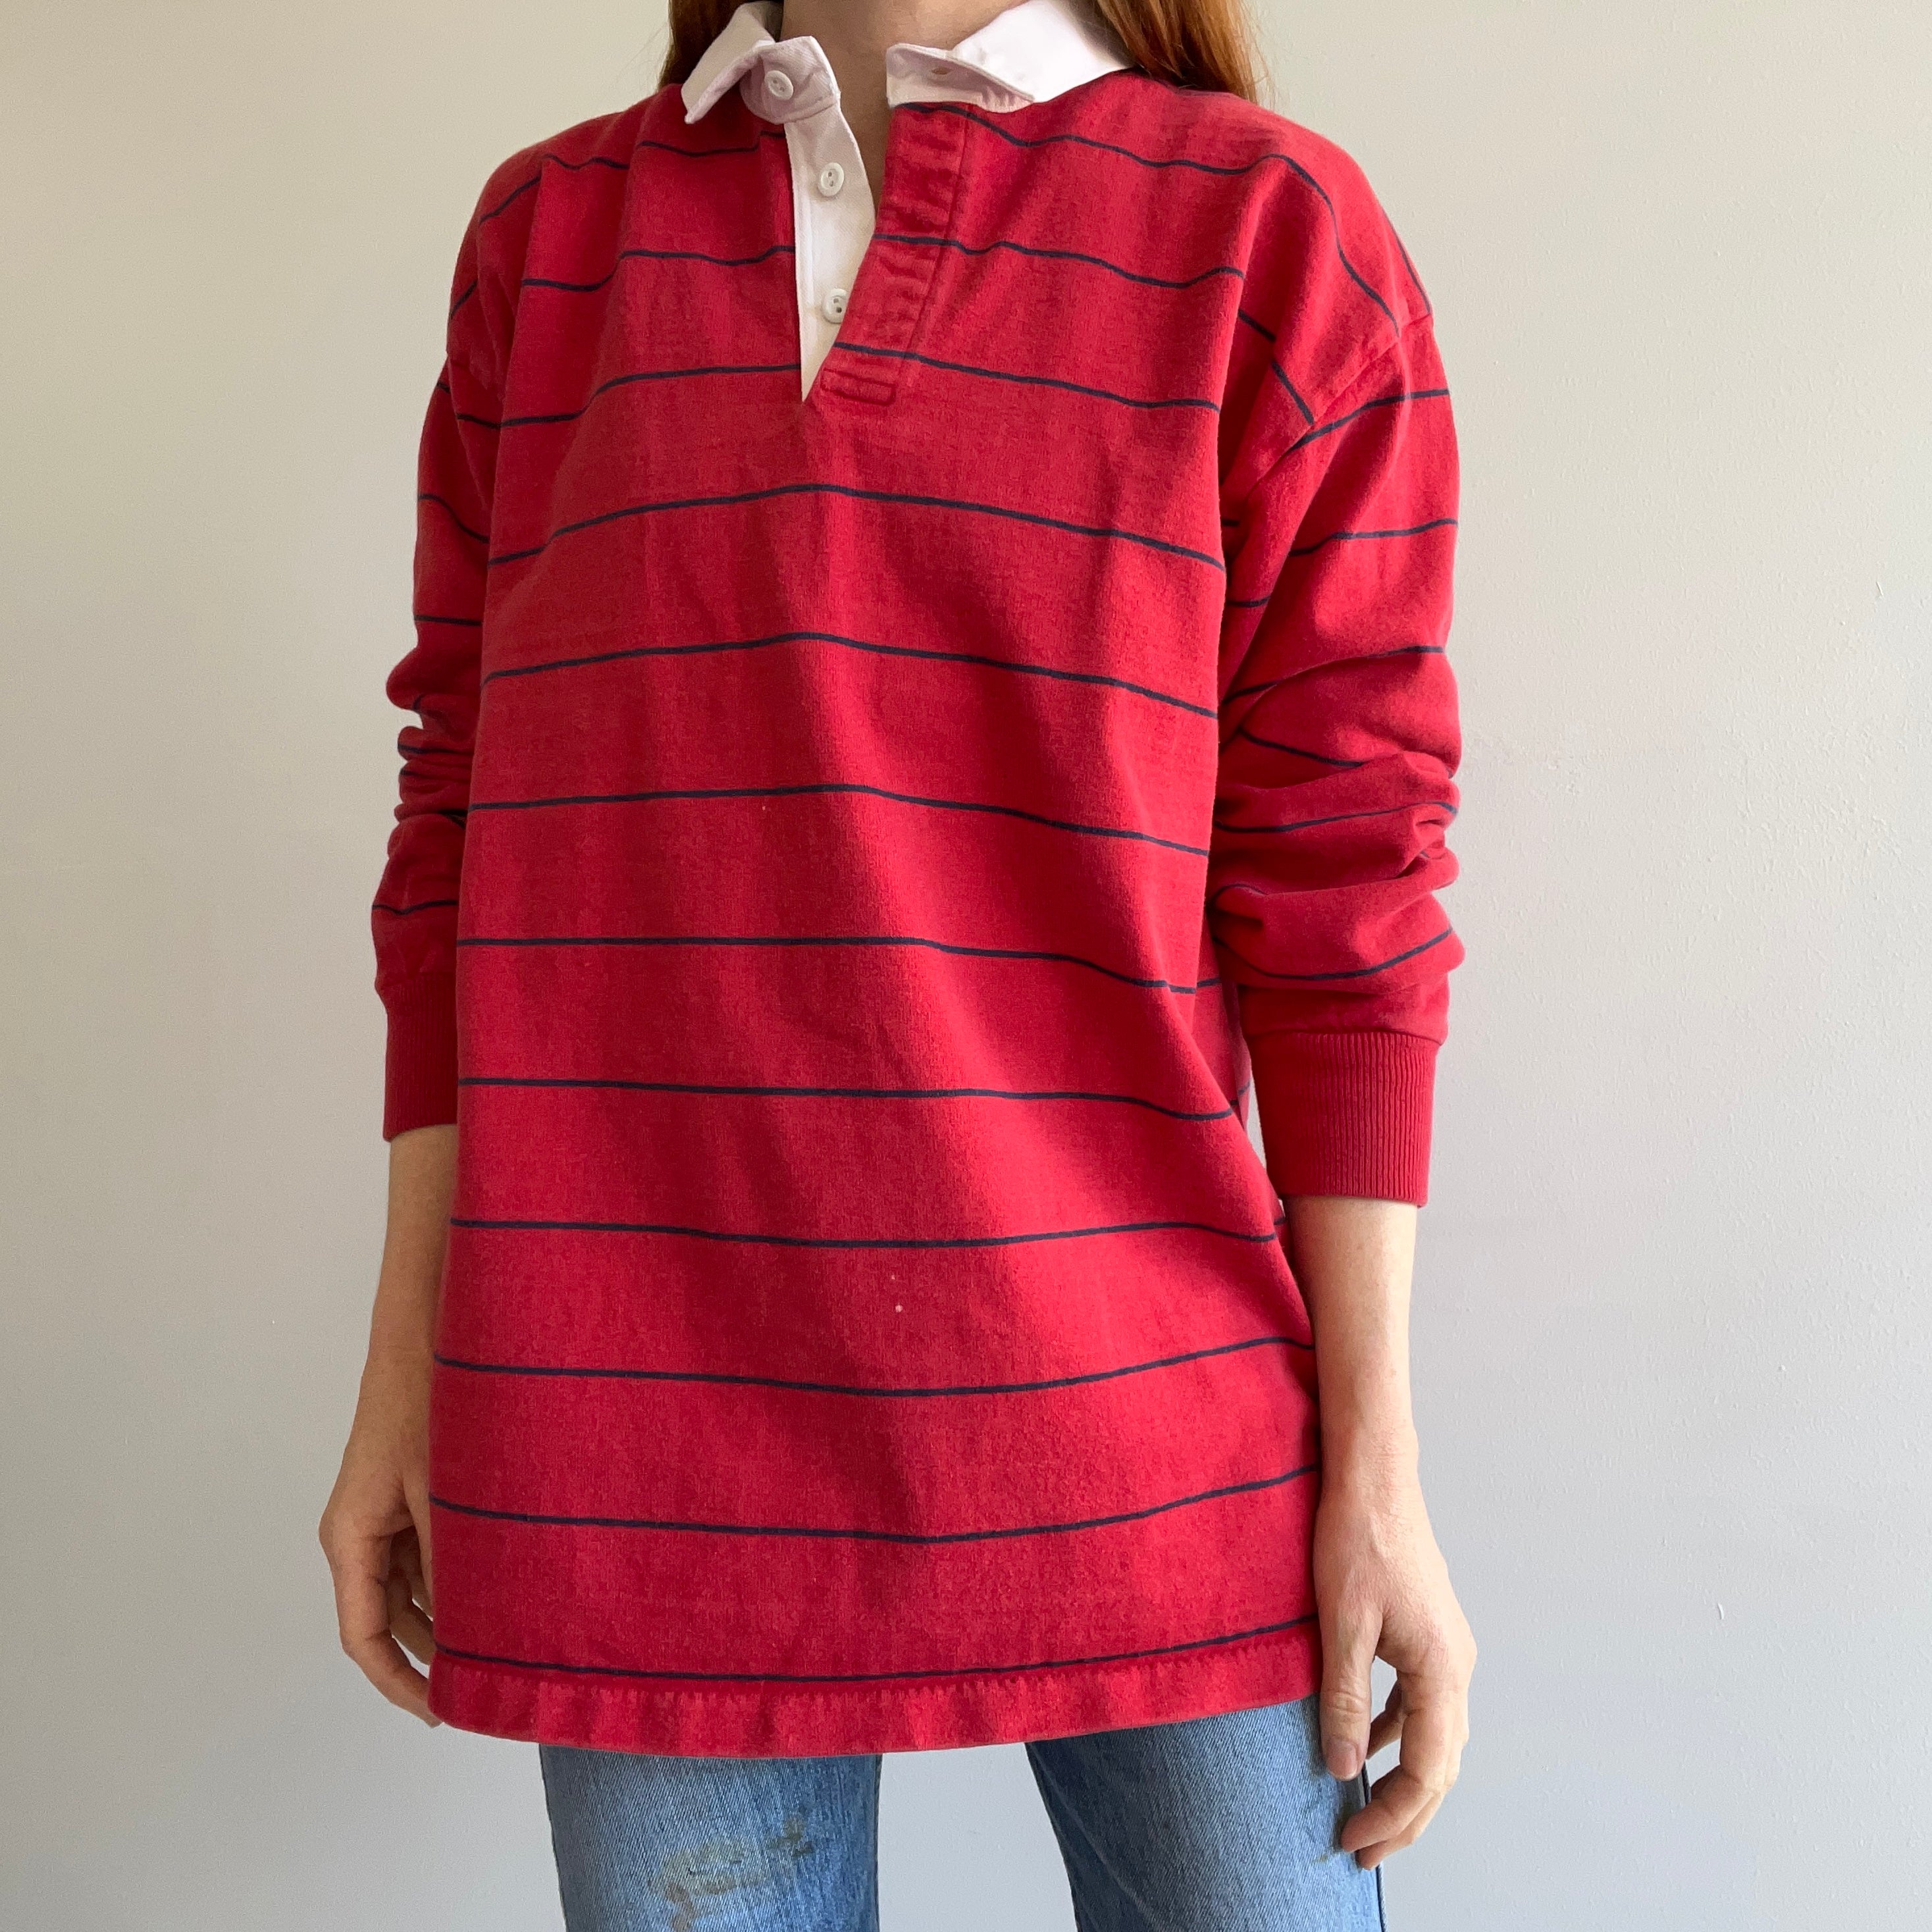 1980s/90s Lands' End Heavyweight Cotton Rugby Shirt – Red Vintage Co